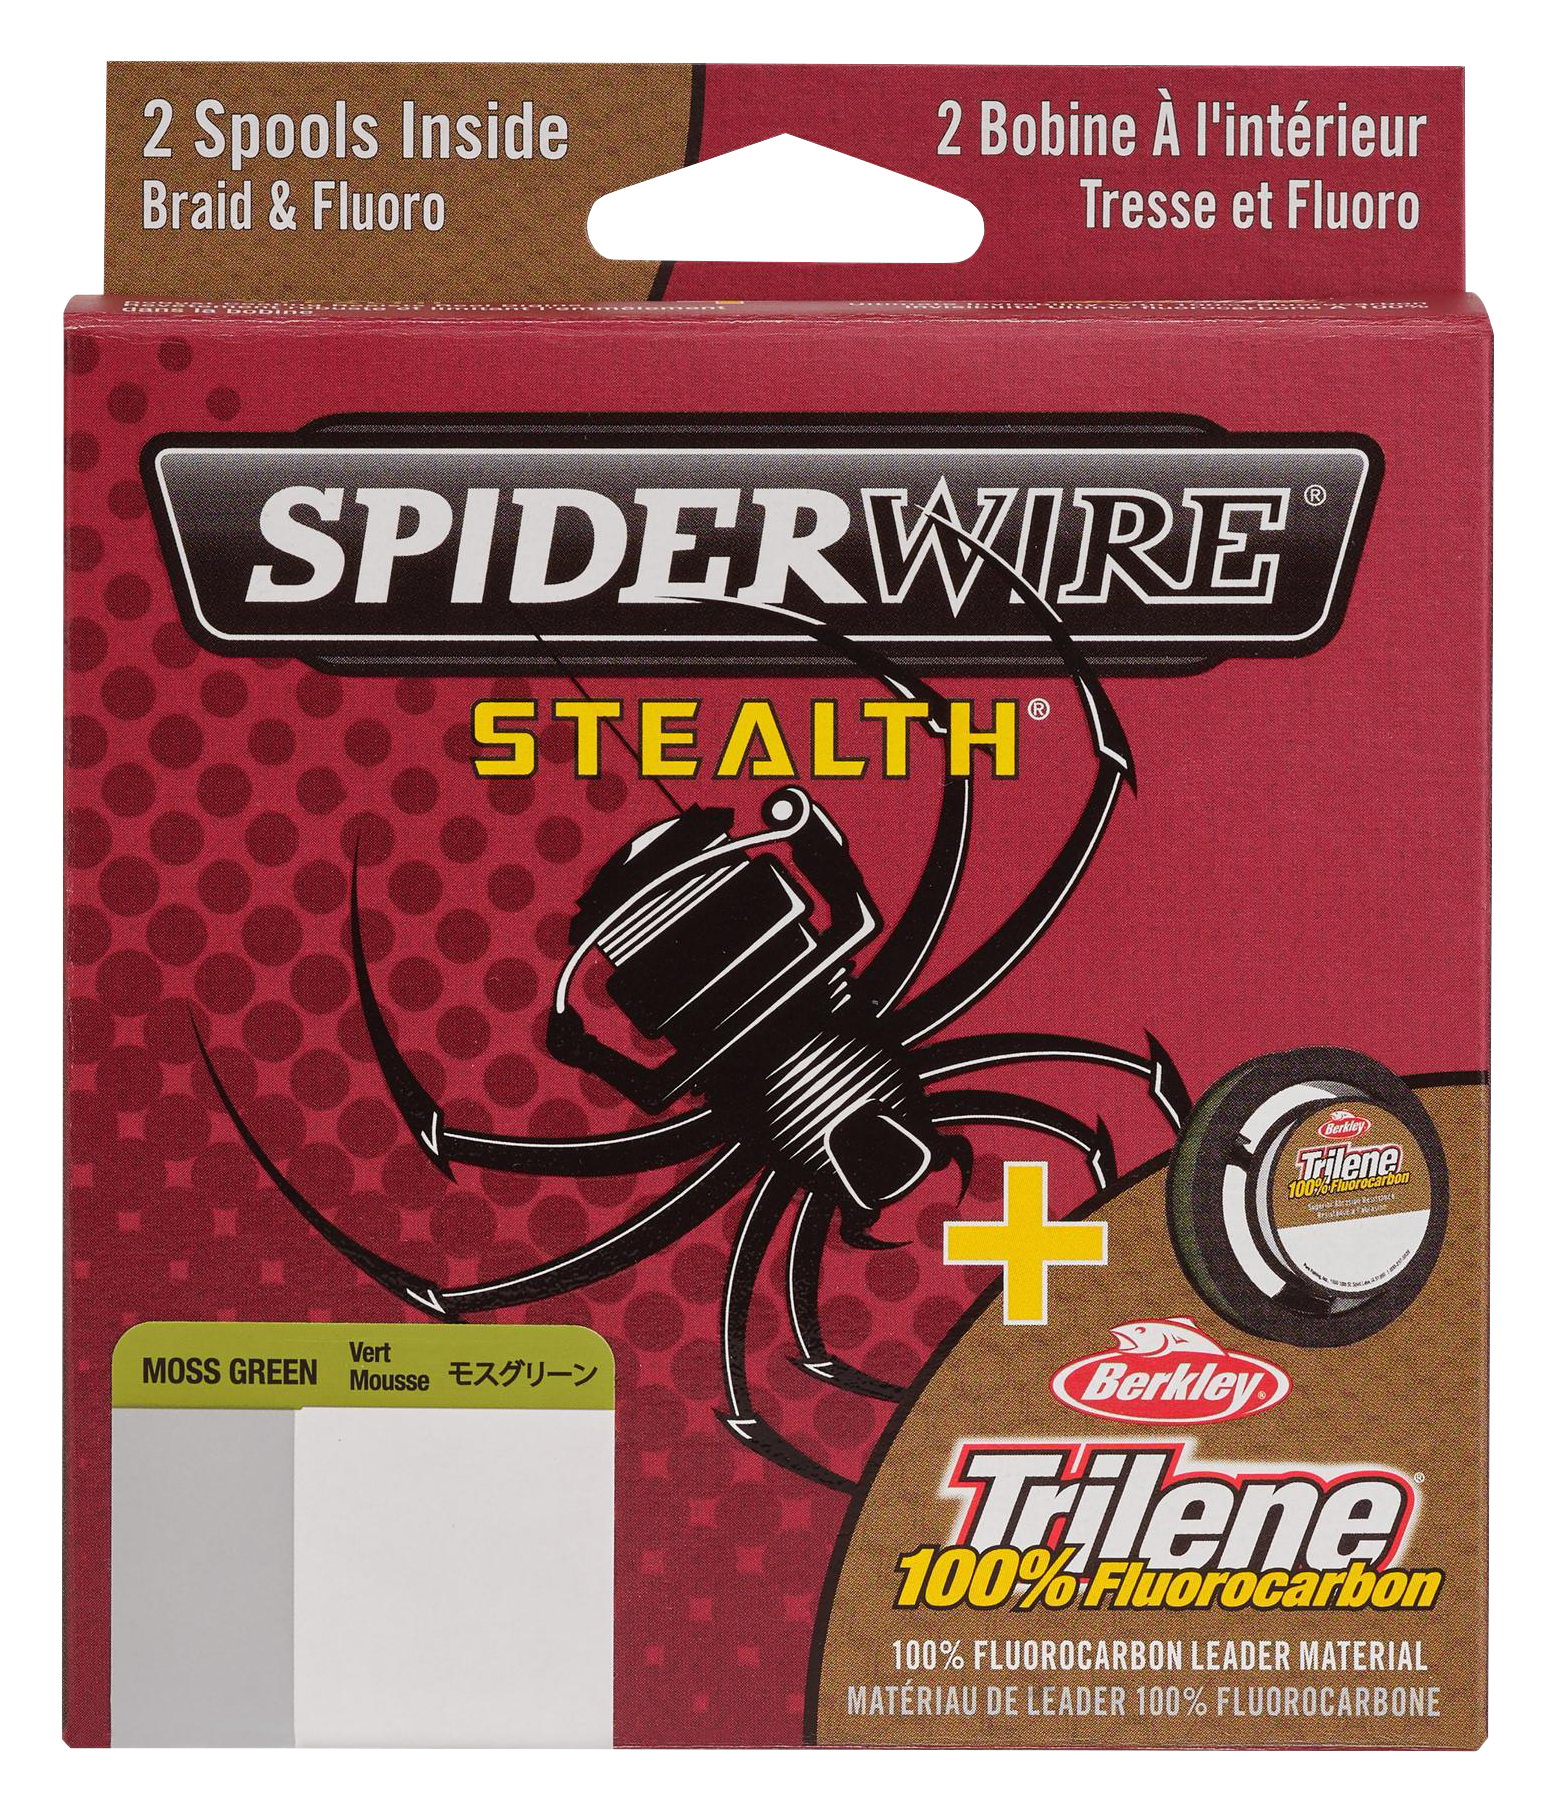 Spiderwire Fishing Clothing, Shoes & Accessories for sale